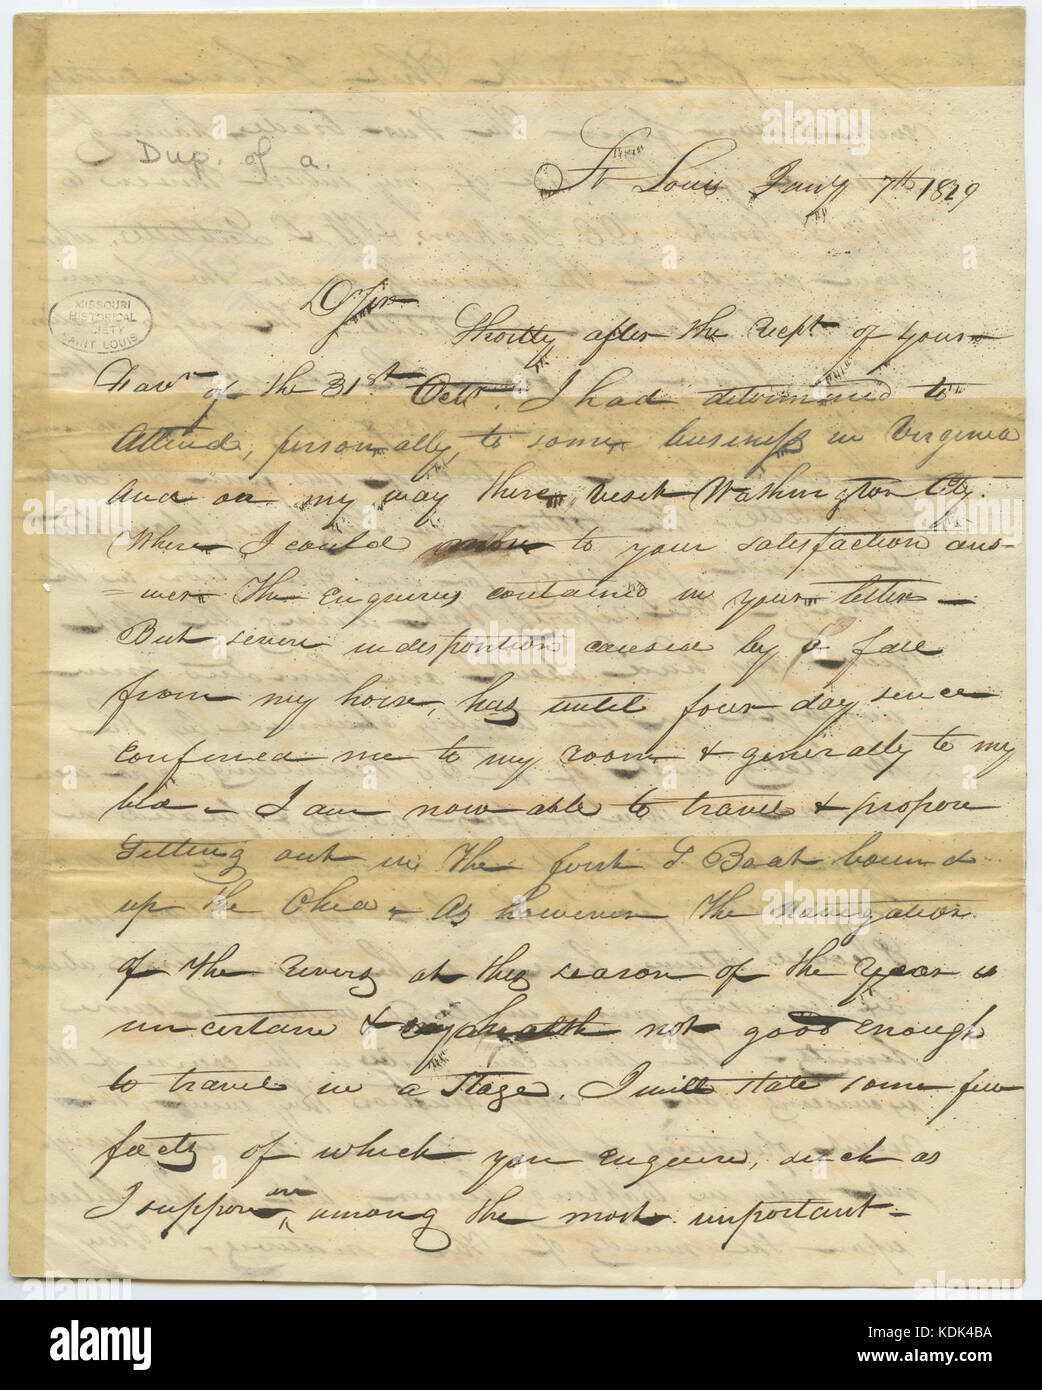 Letter of William H. Ashley to dear sir, January 7, 1829 Stock Photo